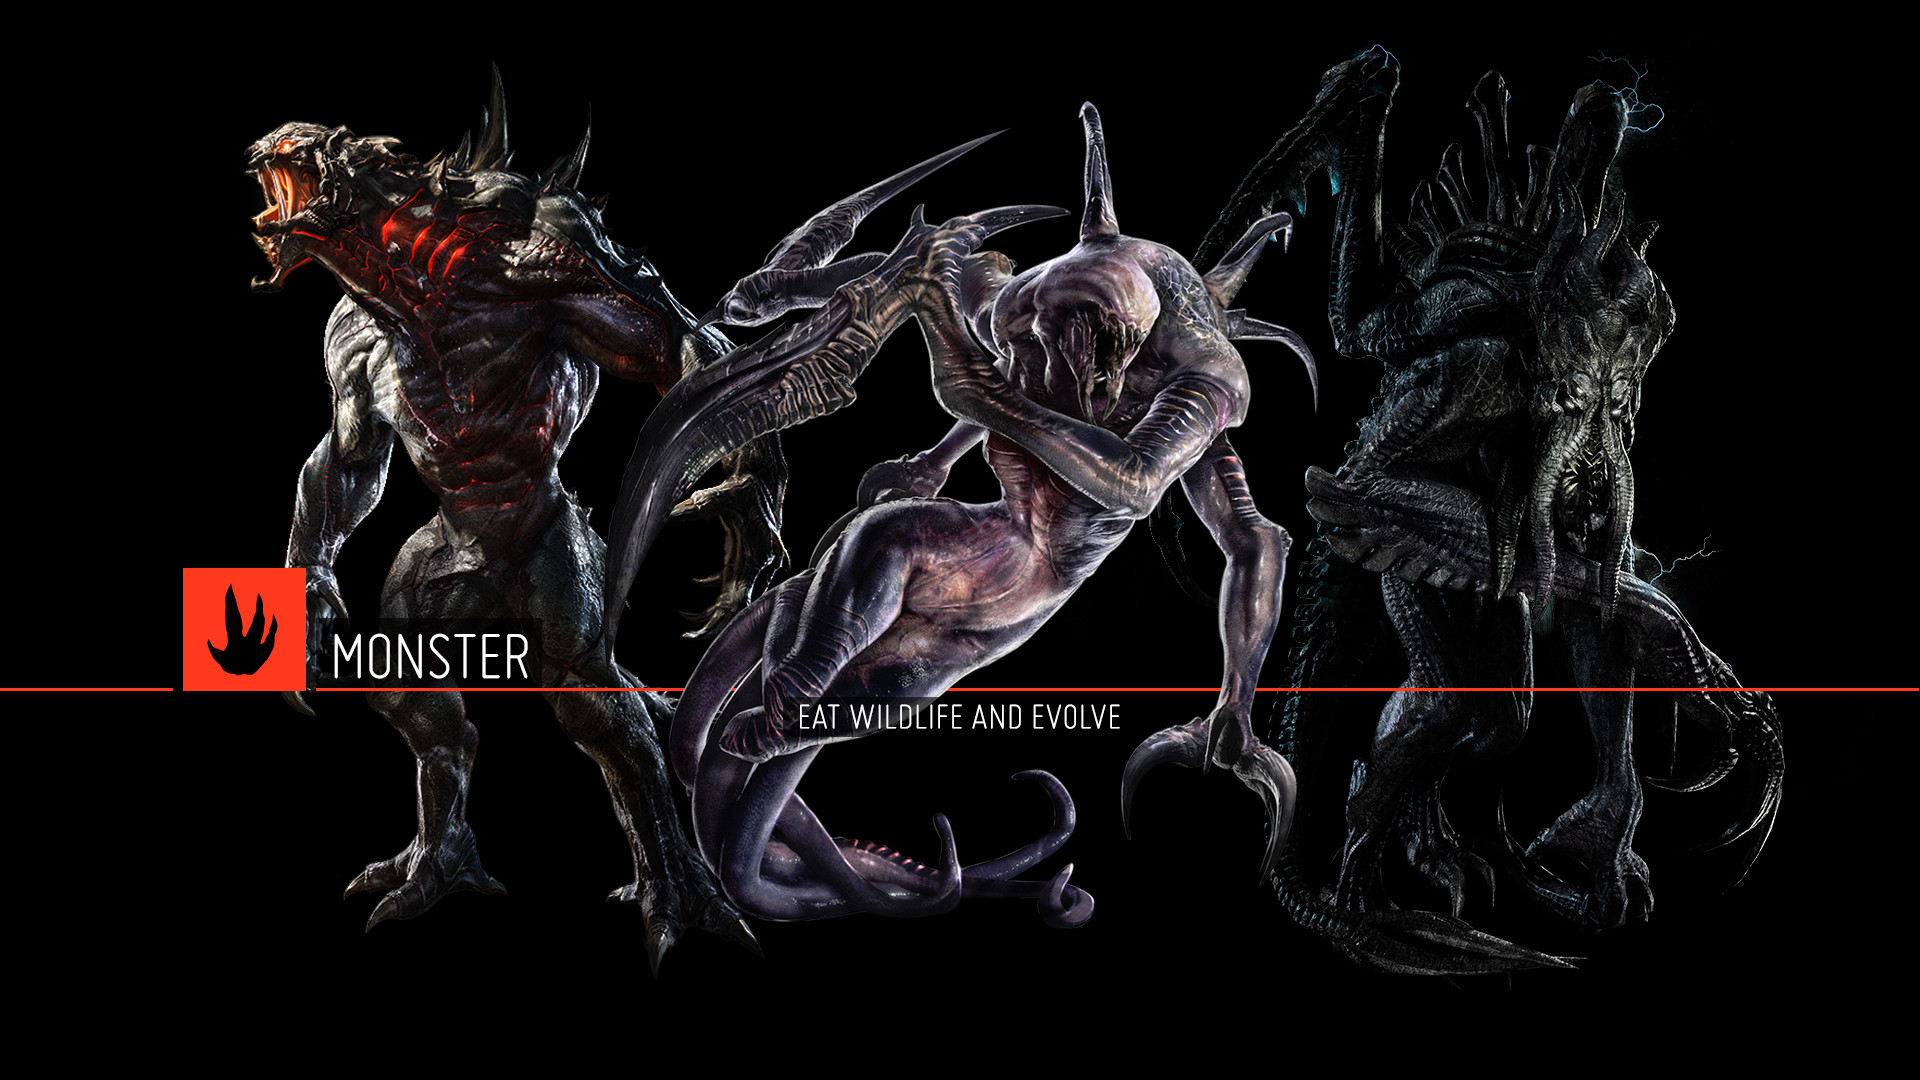 1920x1080 Made more wallpapers for Evolve! FEEDBACK is greatly appreciated! smile  [image] [image] [image] [image] ...